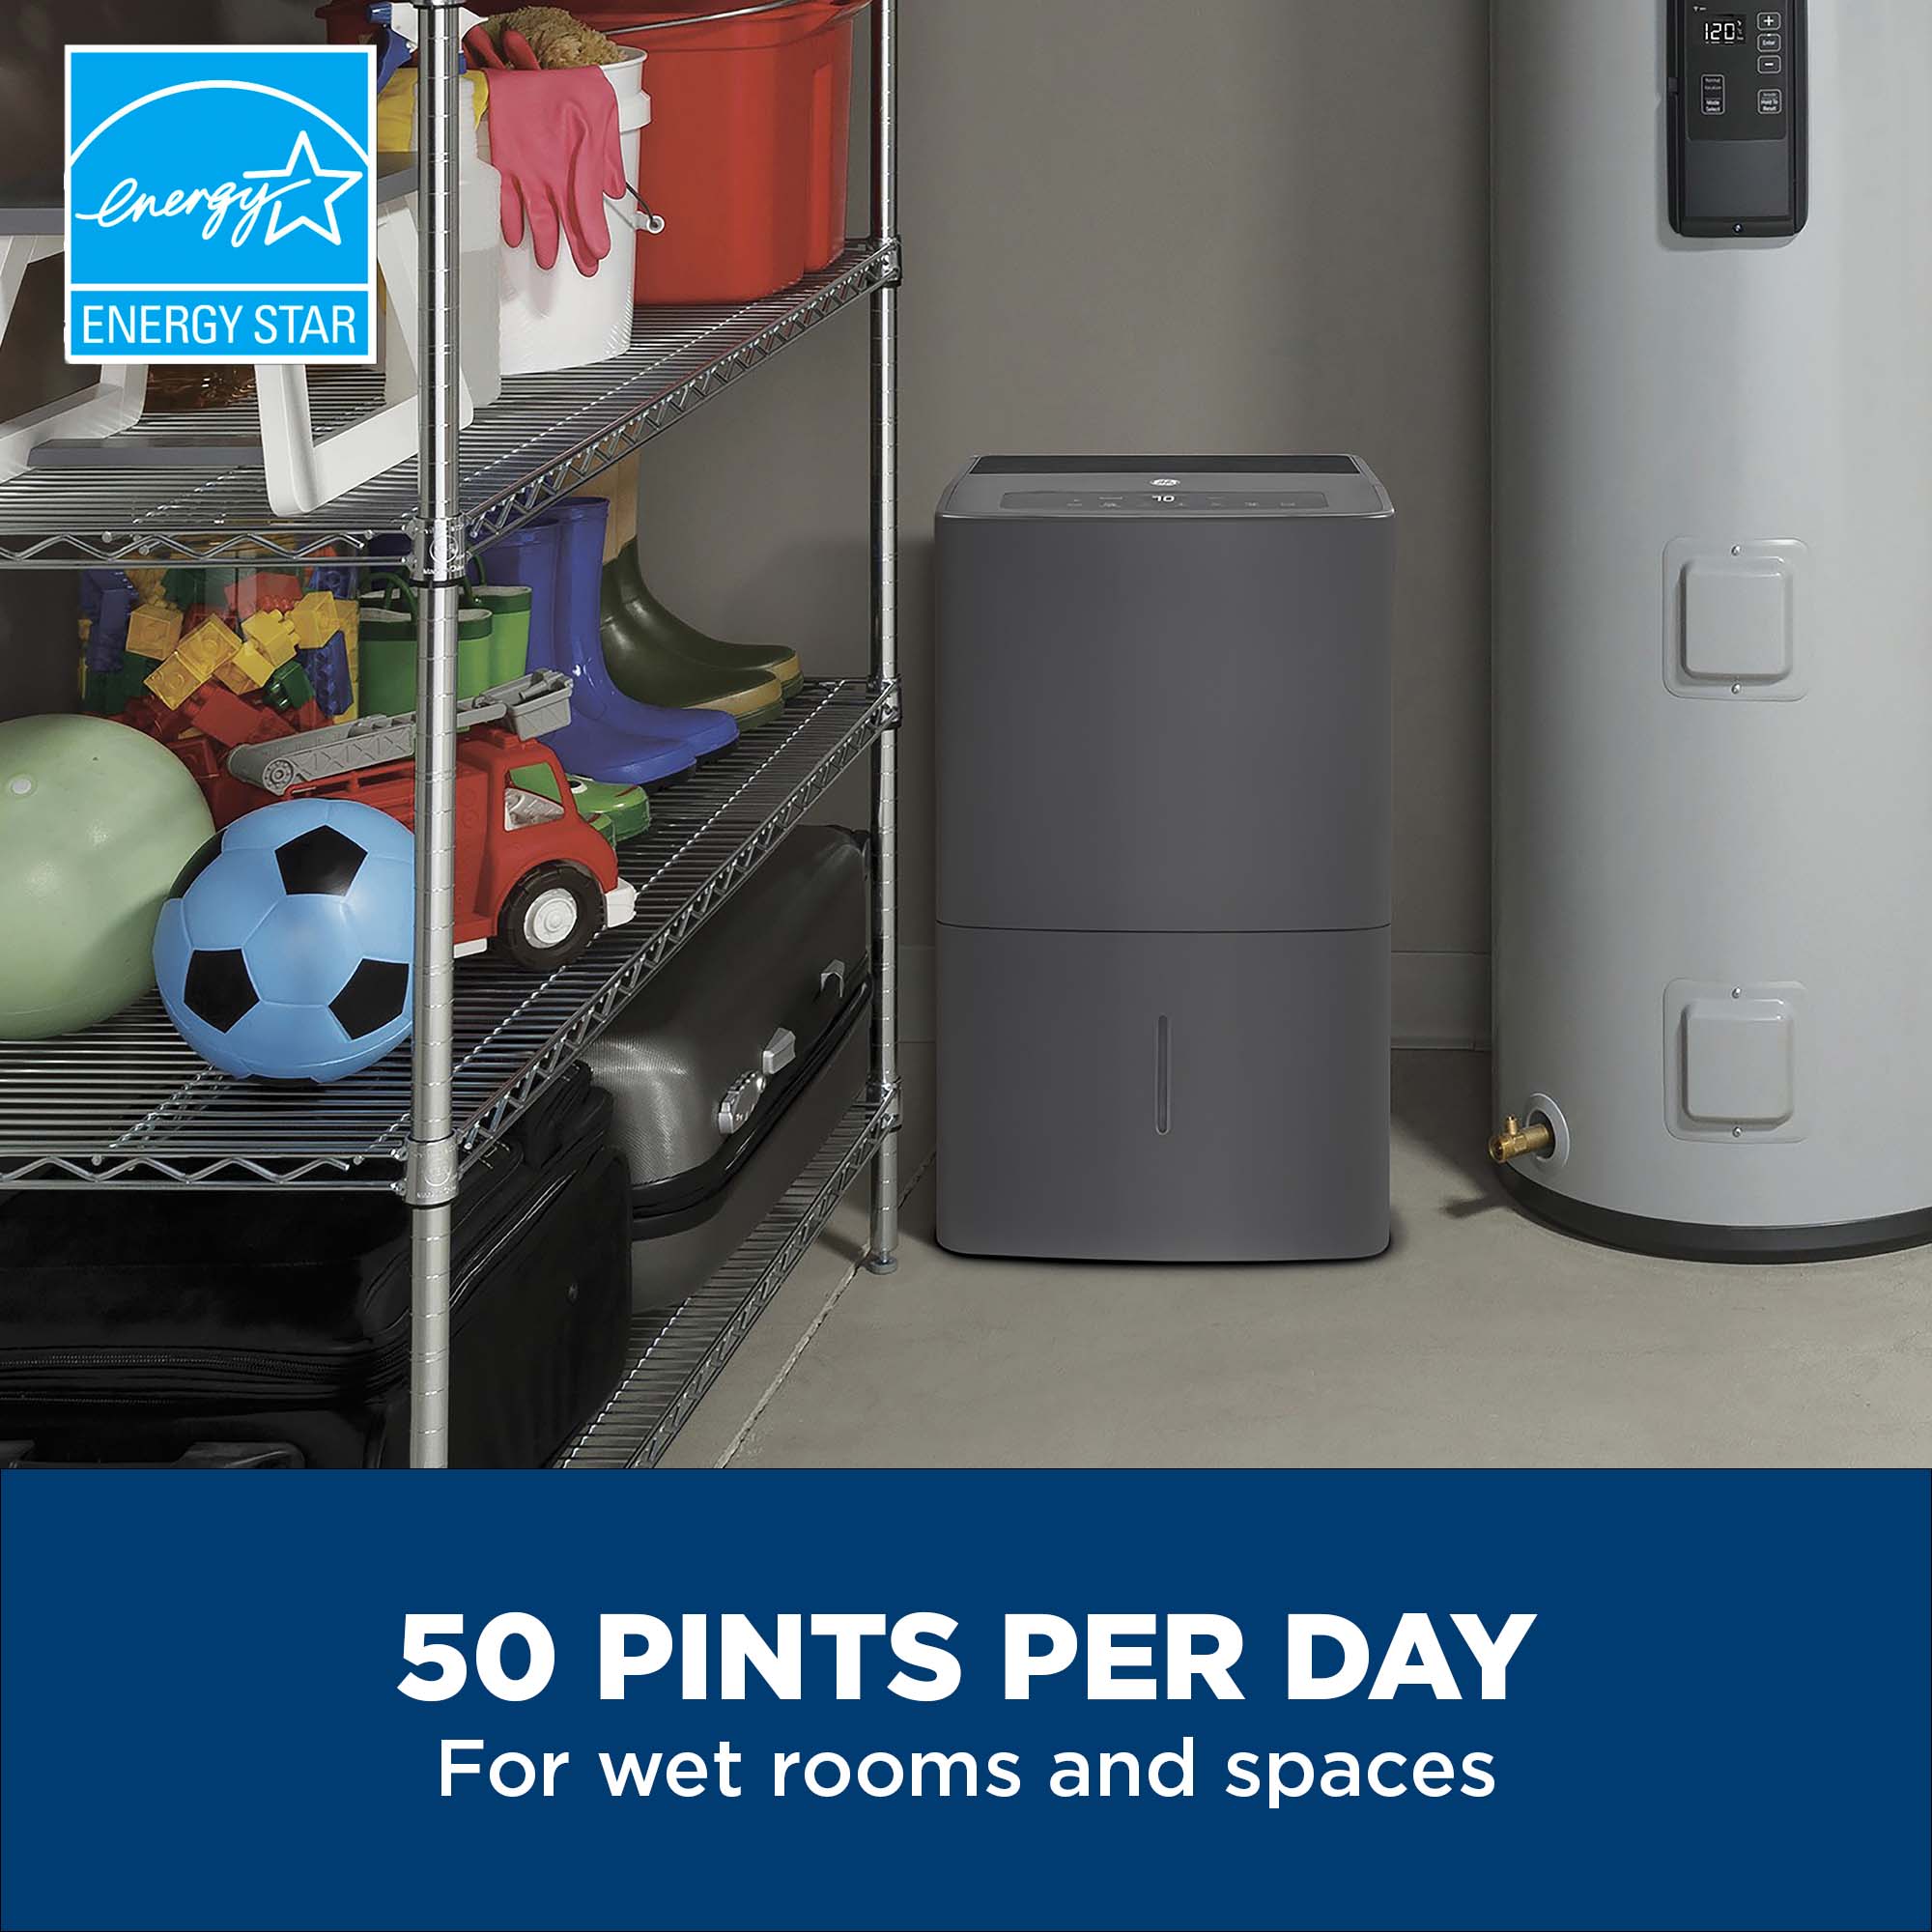 GE® ENERGY STAR® 50 Pint Portable Dehumidifier with Built-in Pump for Wet Spaces